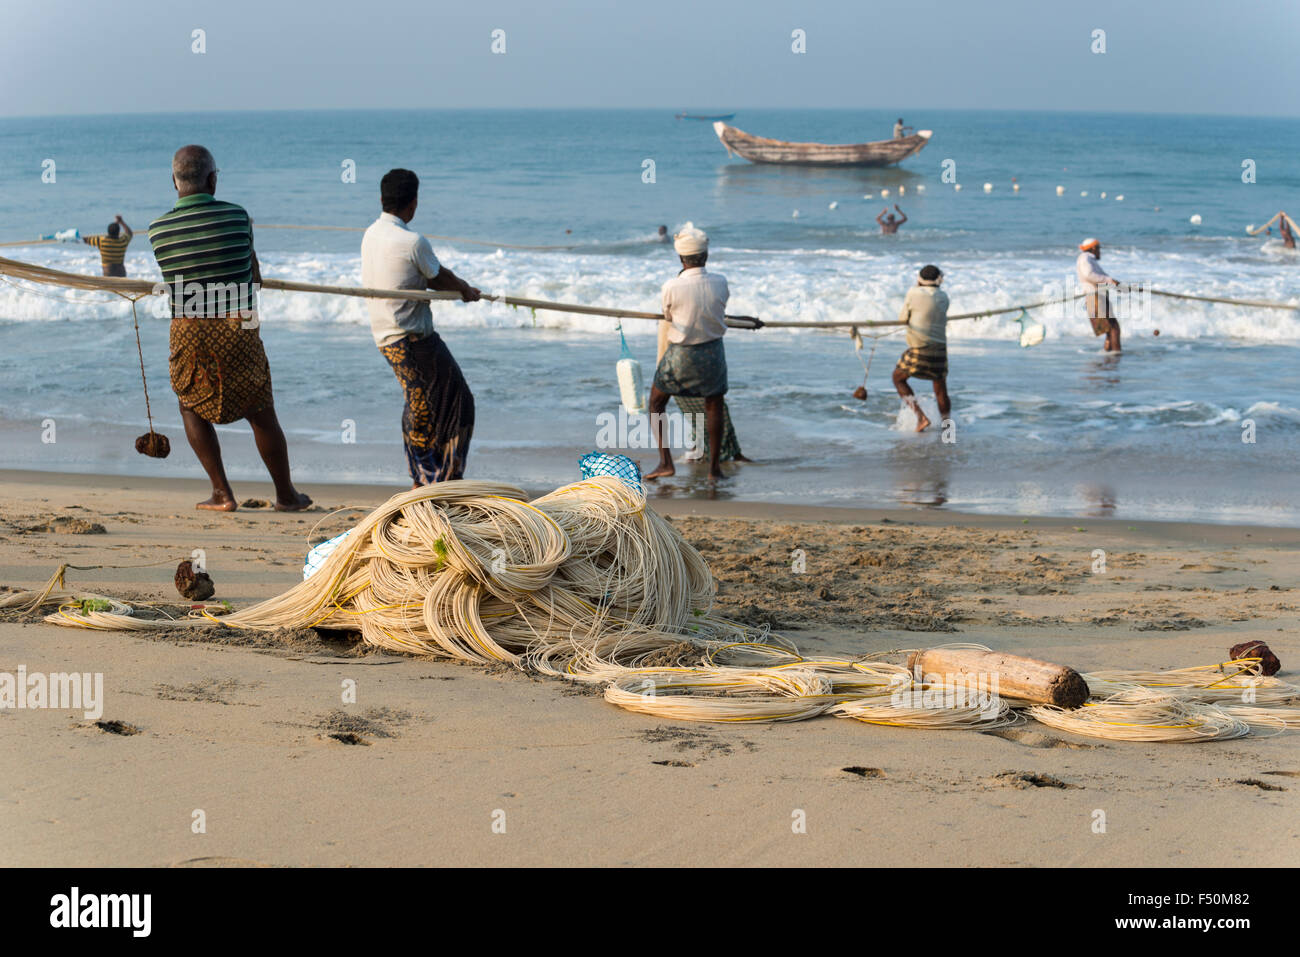 A group of fishermen is pulling out the fishing nets onto the